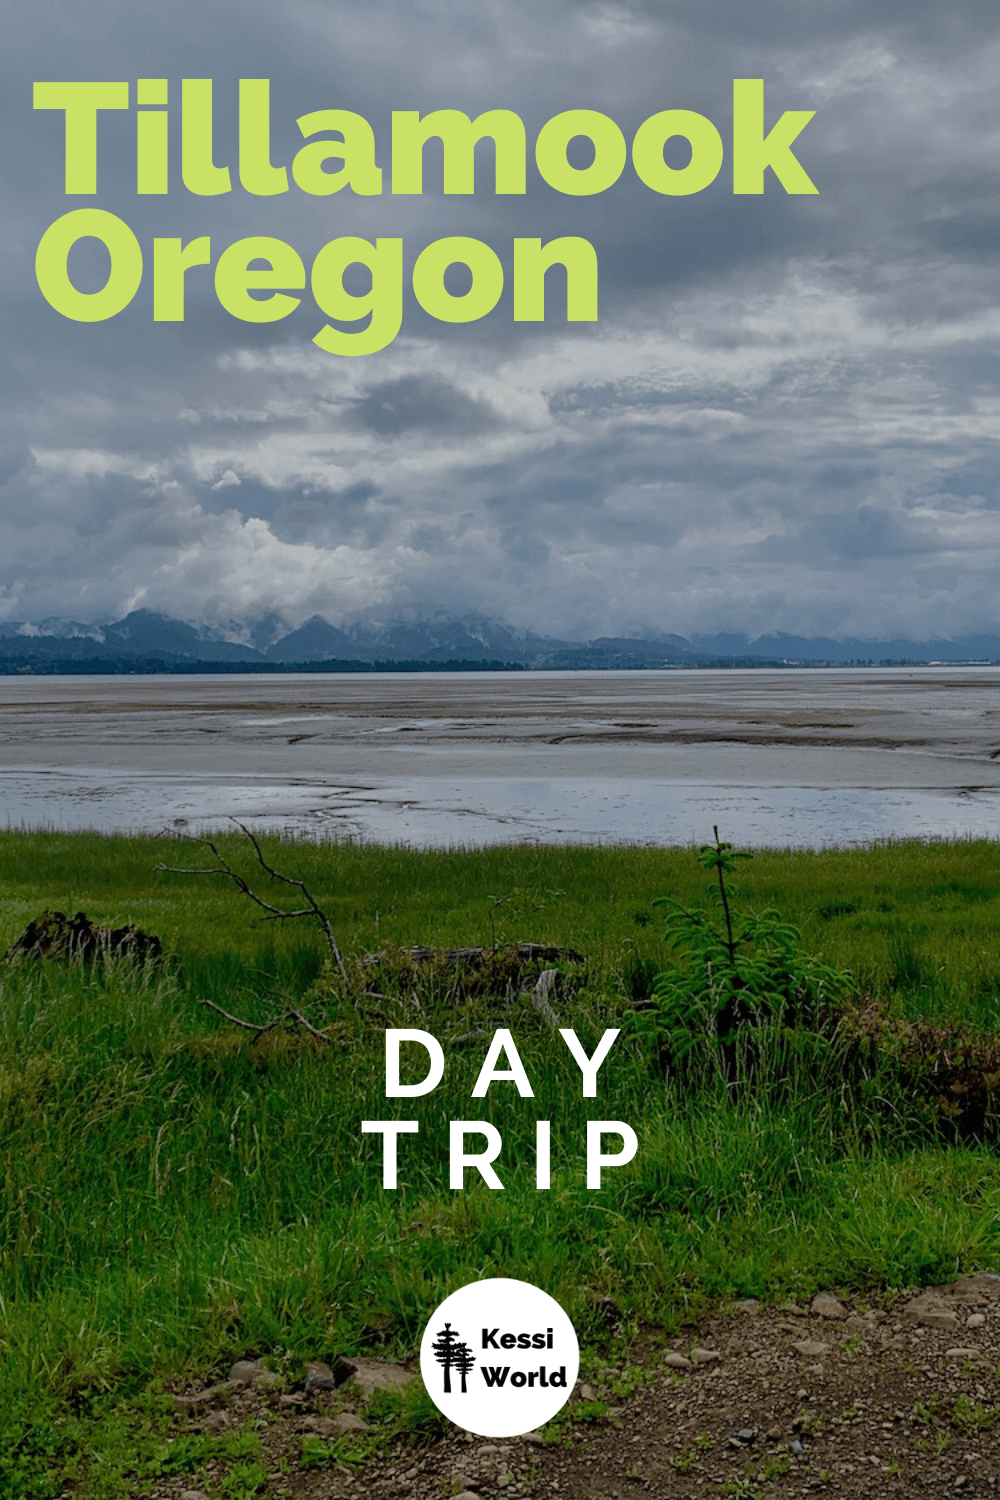 Bayocean is a peaceful spit of land between the Pacific Ocean and Tillamook Bay. The coastal colors are alive with bright greens and the gray clouds and brown sand and road add contrast to this photo.